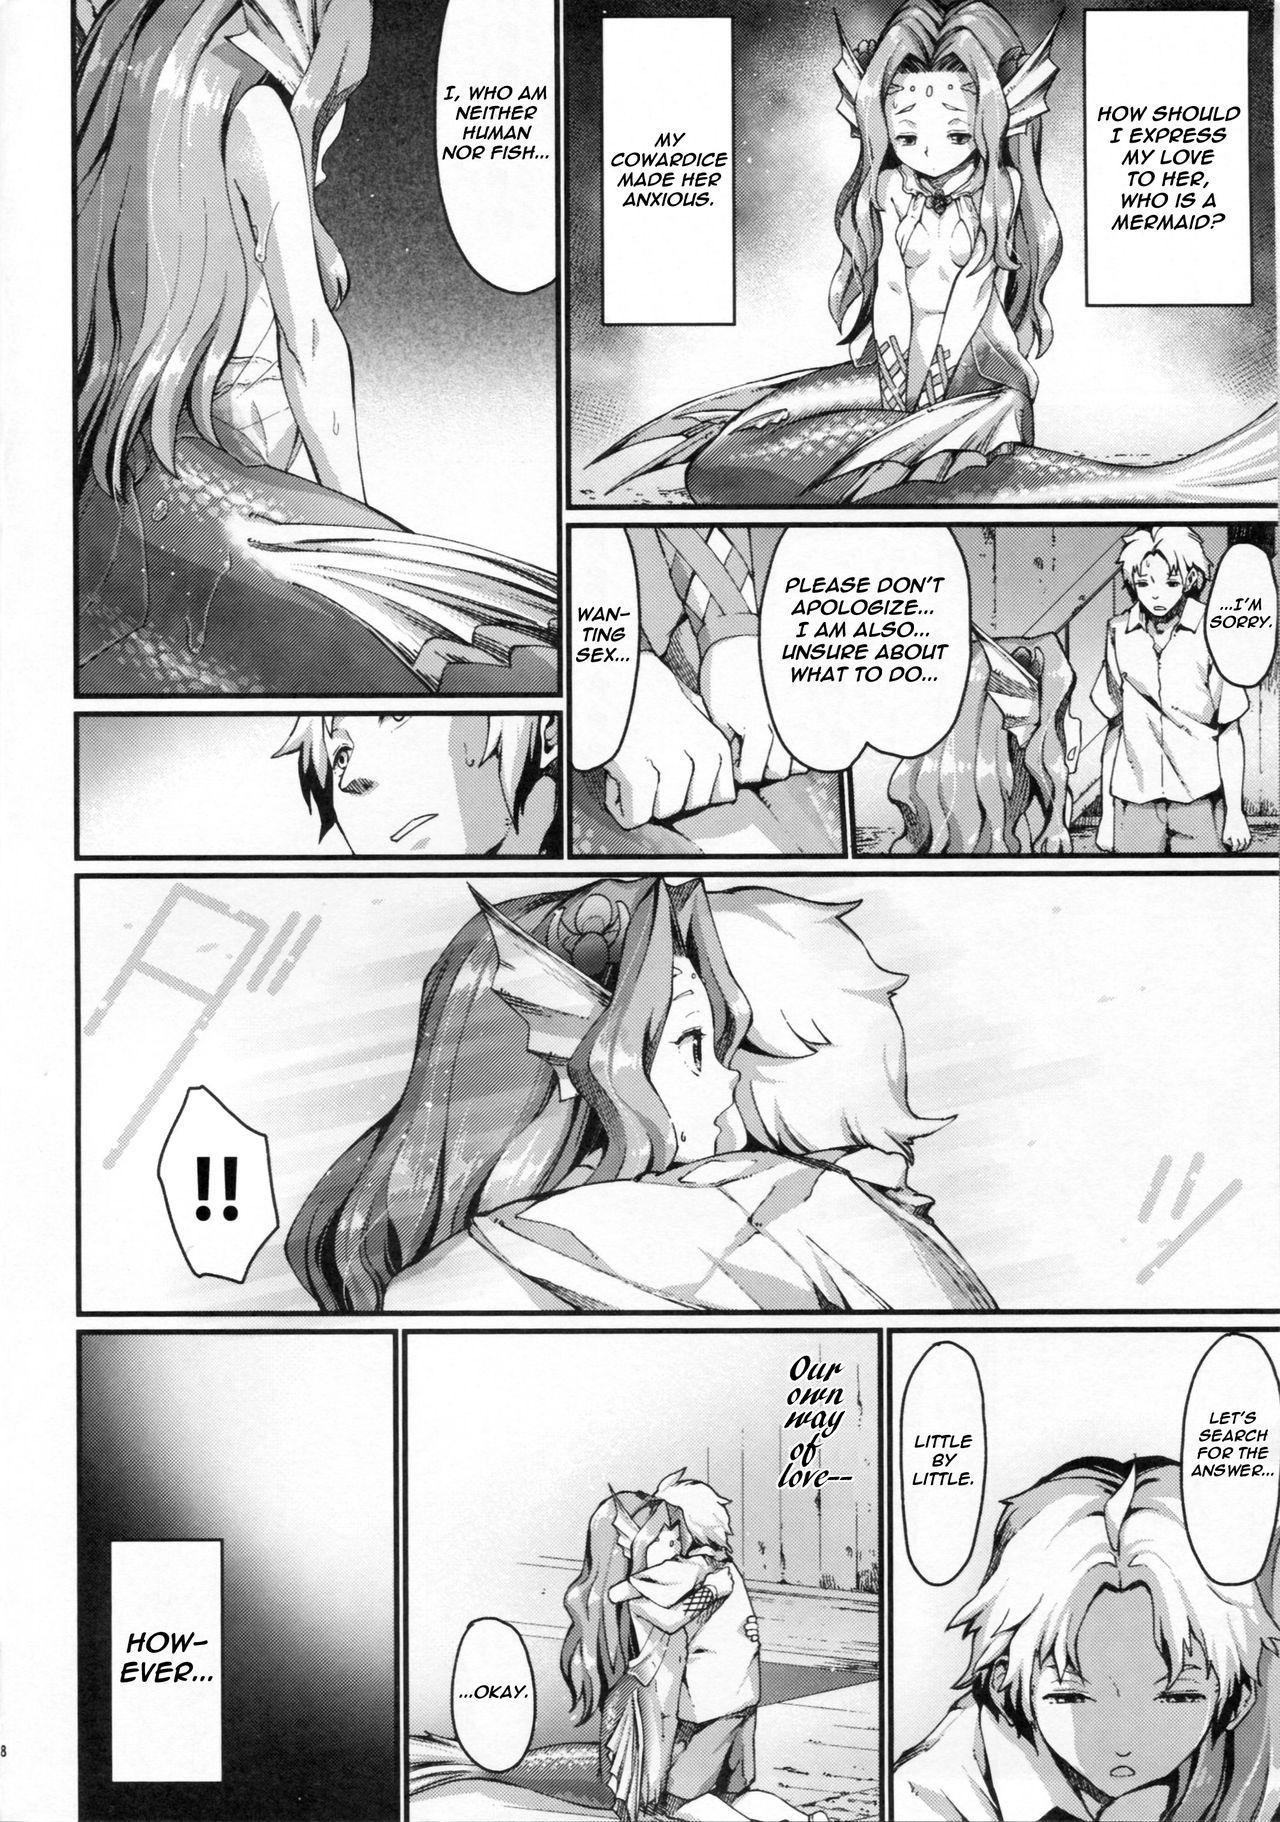 Behind mermaid mating Stretch - Page 7